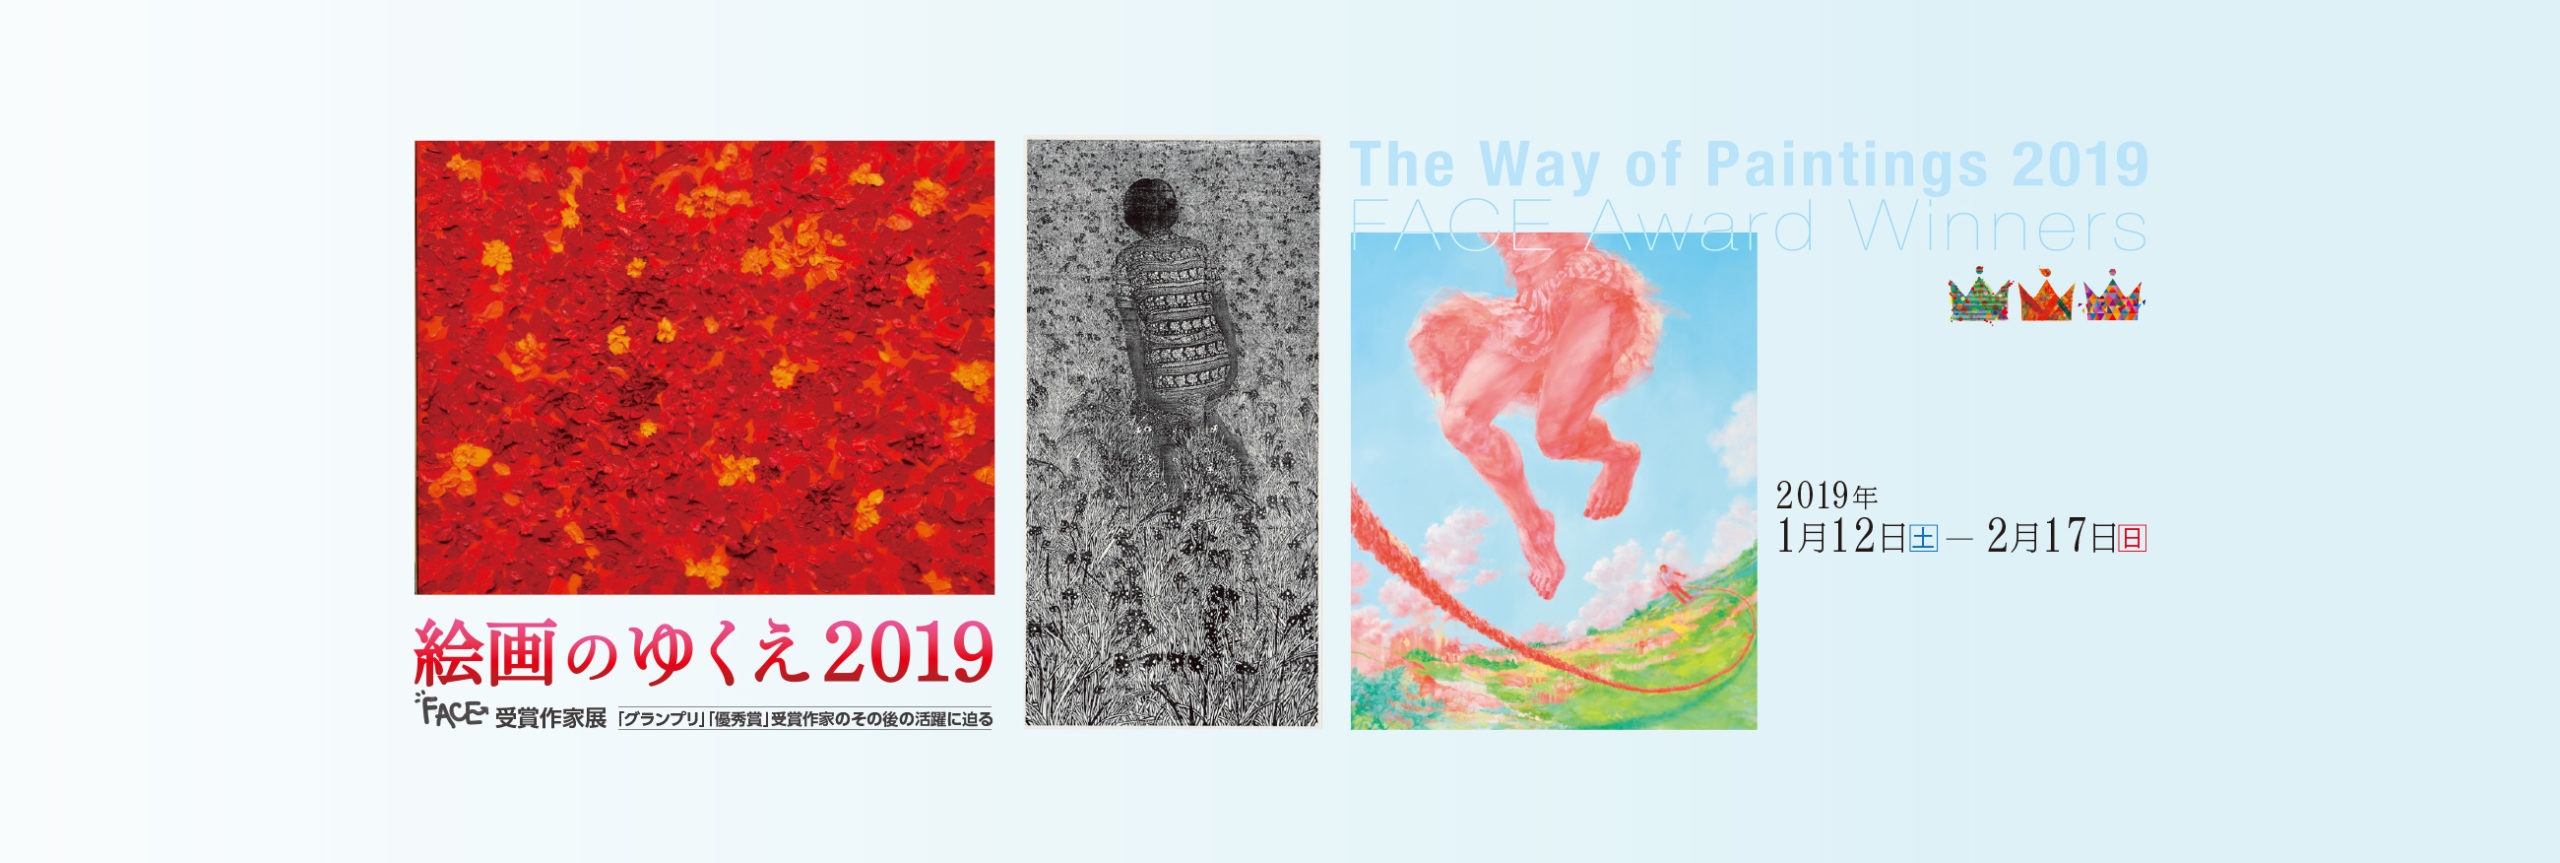 The Way of Paintings 2019